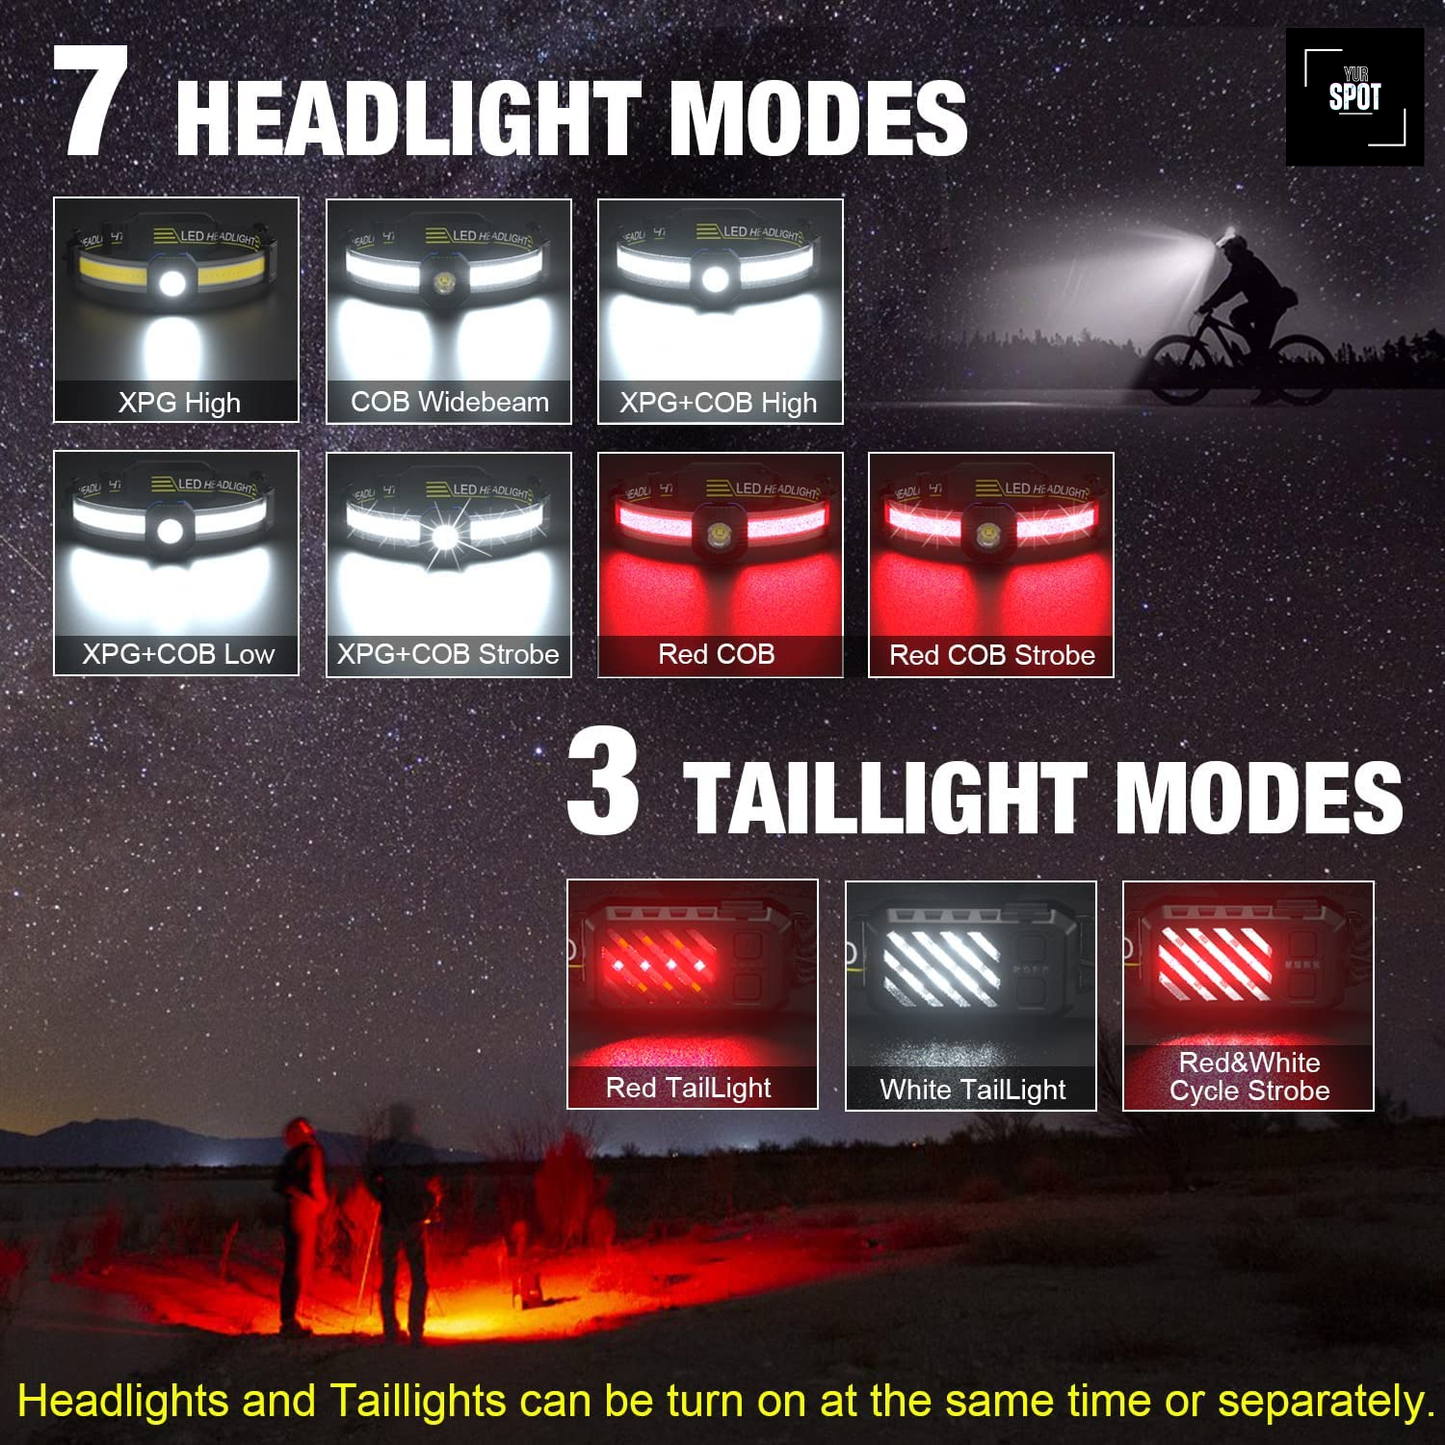 "Rugged LED Hard Hat Headlamp for Construction: 1000 Lumens Widebeam, USB Rechargeable with Red Safety Taillight, Lightweight & Waterproof for Job Site, Camping, and Hiking"